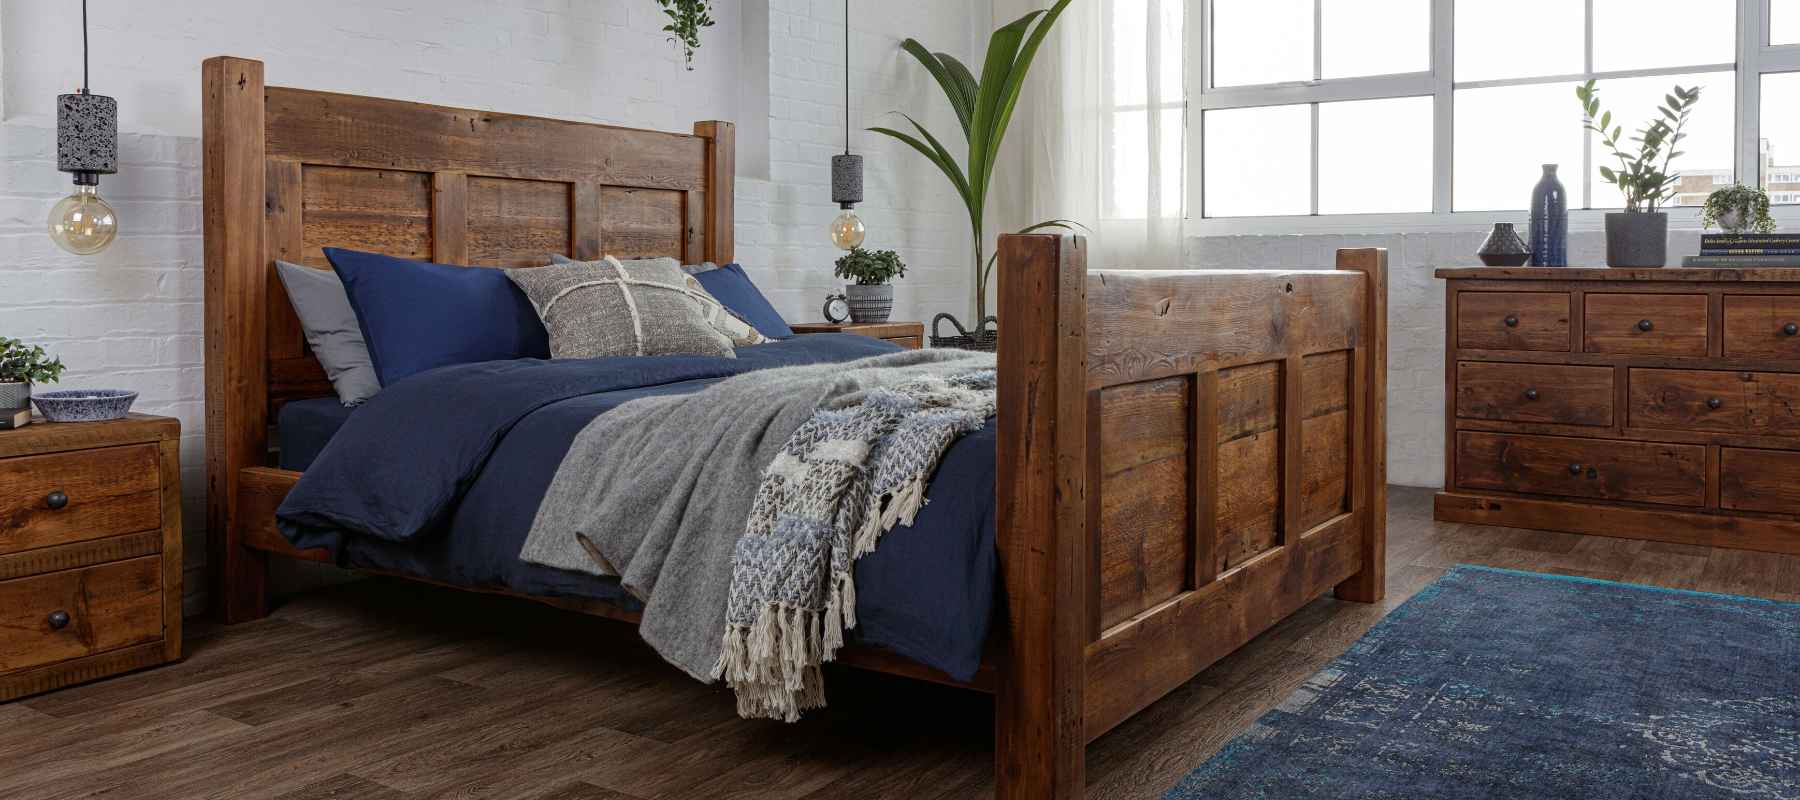 Reclaimed wood bed frame with blue bed covers and blue rug